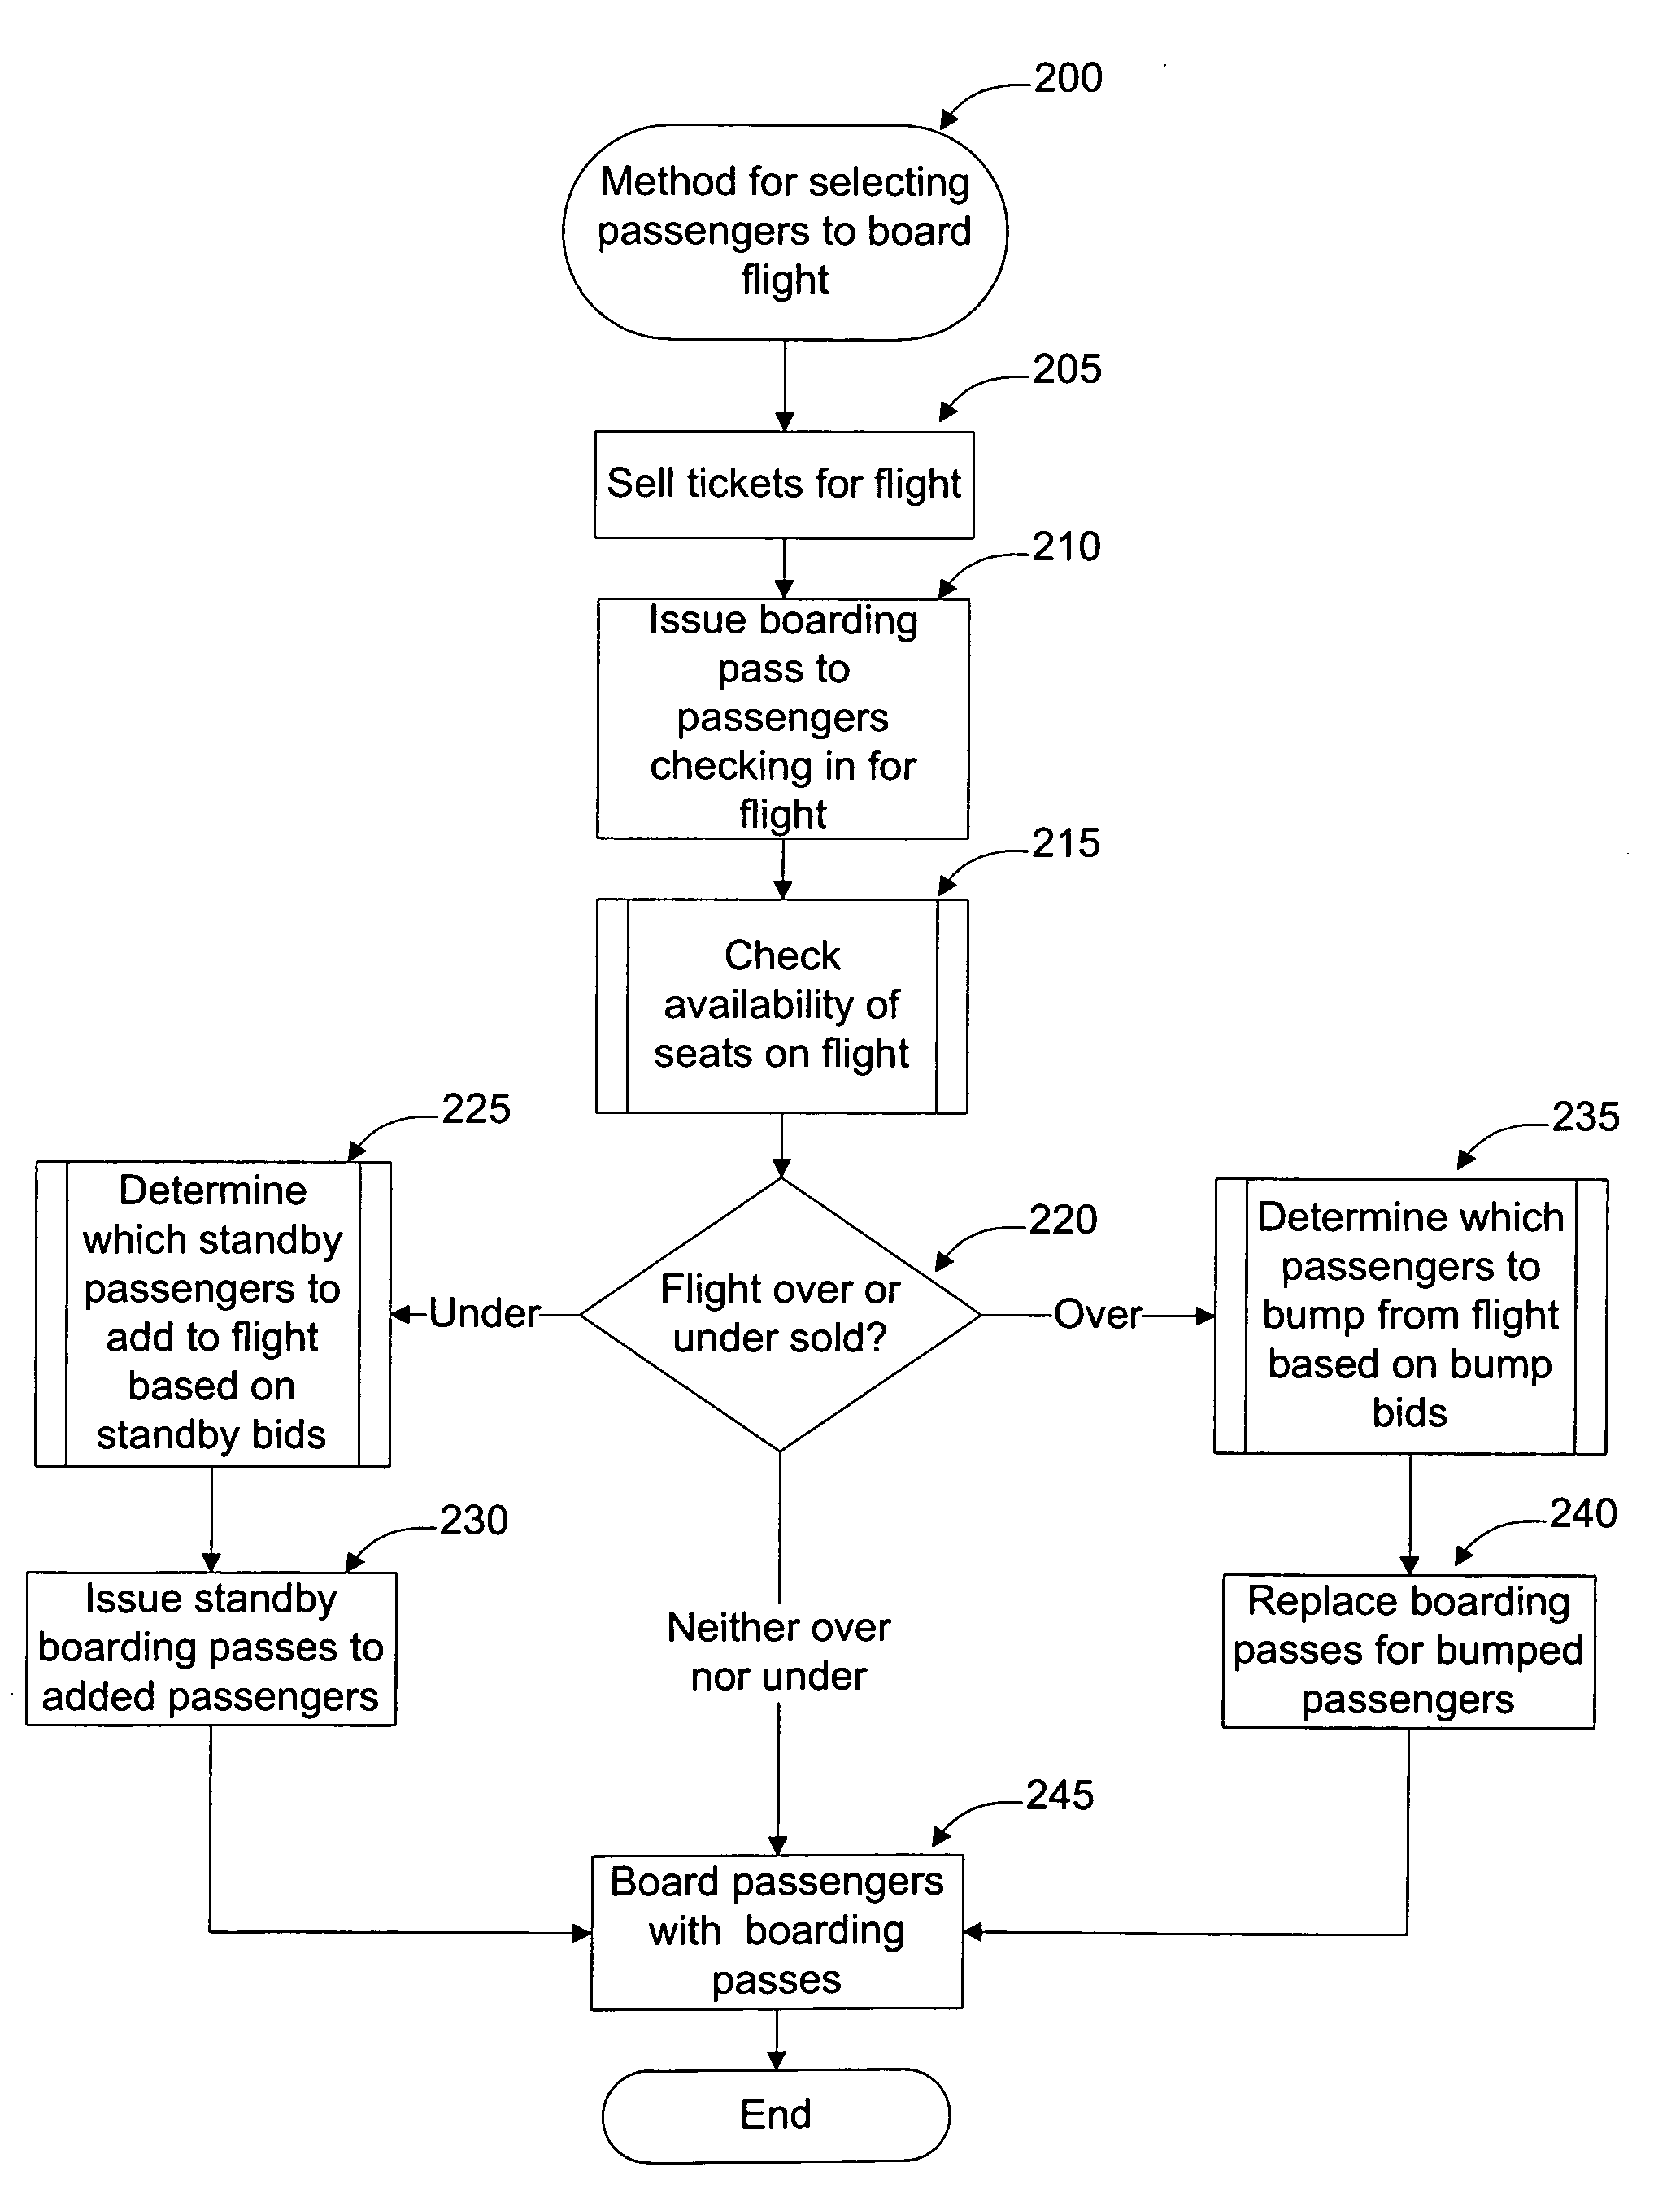 System and method for boarding passangers based on bids